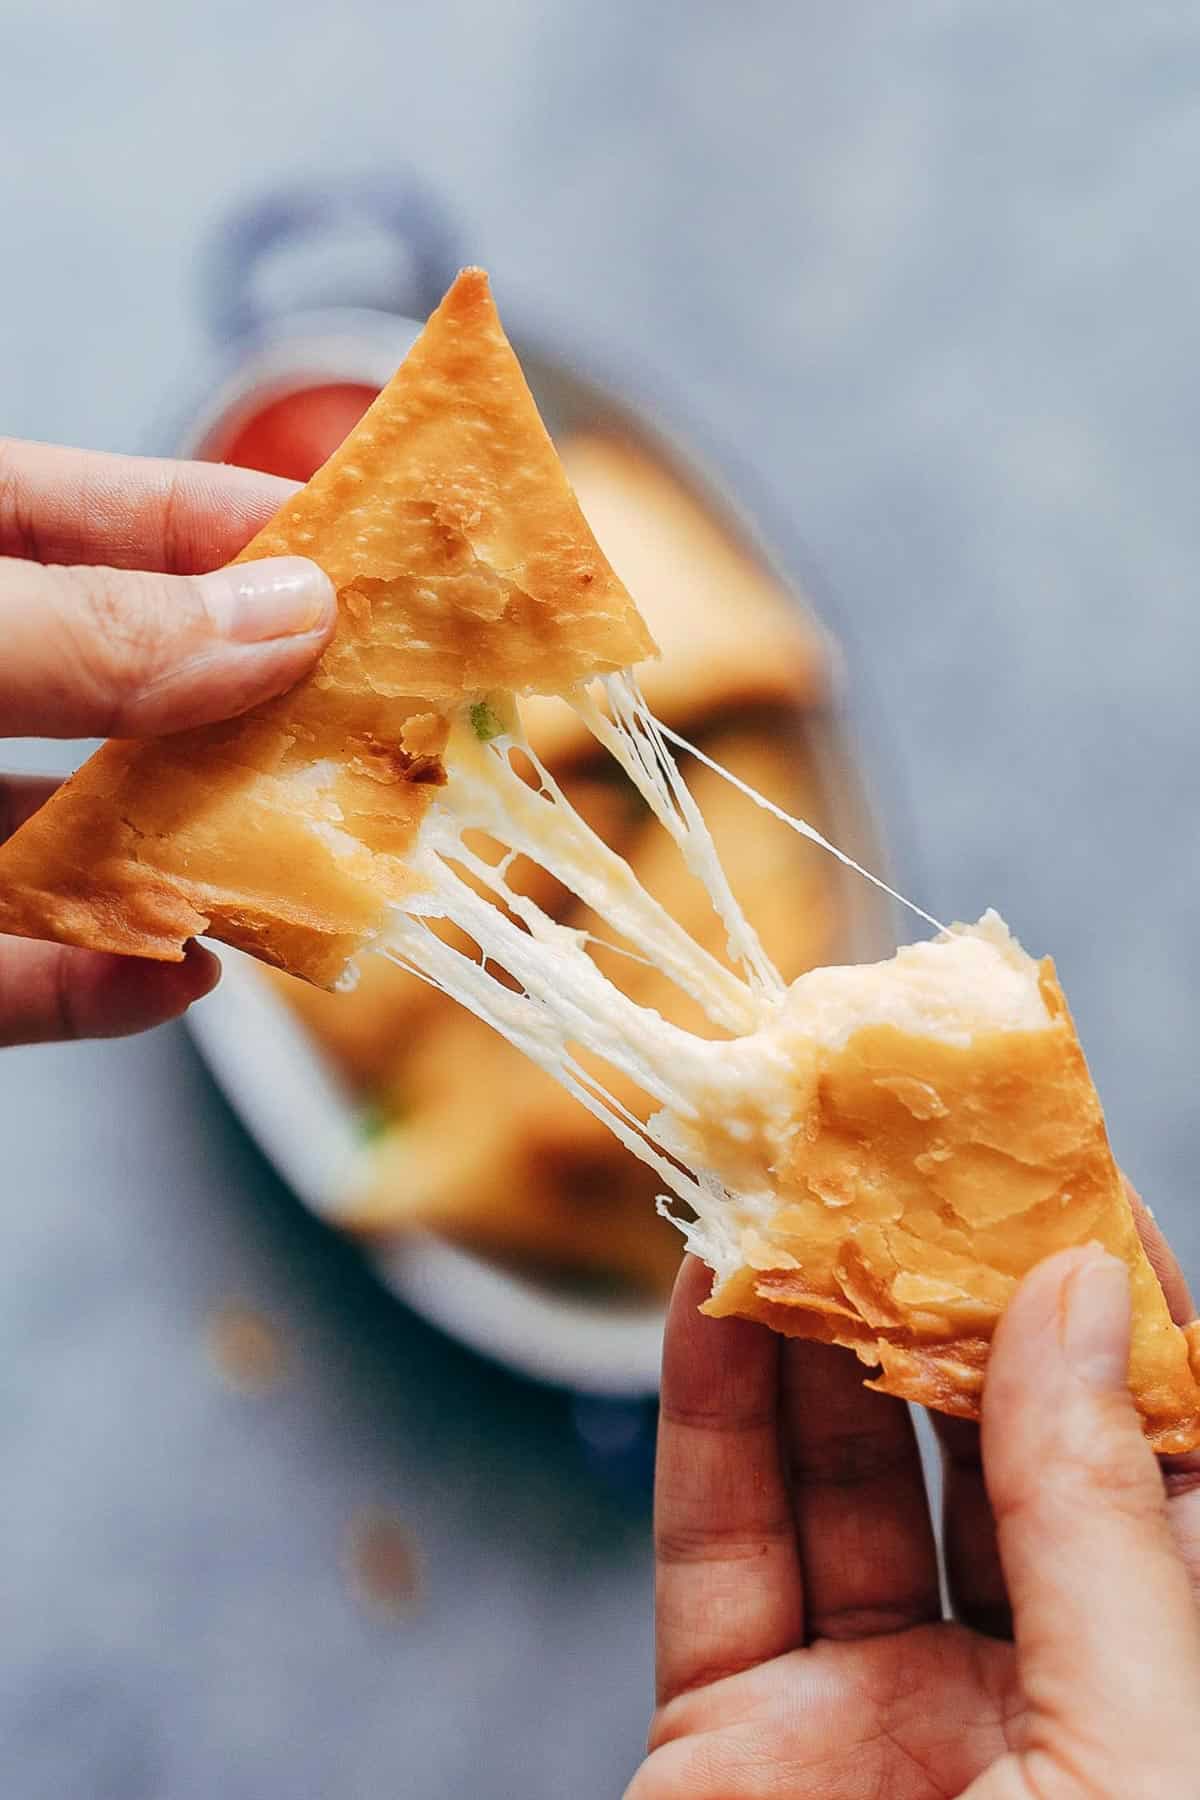 Super cheesy jalapeno three cheese samosa are sure to become a favourite because who can resist gooey stringy cheese stuffed in crispy samosa wrappers! These vegetarian samosas have a filling of mozzarella, cream cheese, smoked cheddar and jalapenos and folding them is really easy too. 